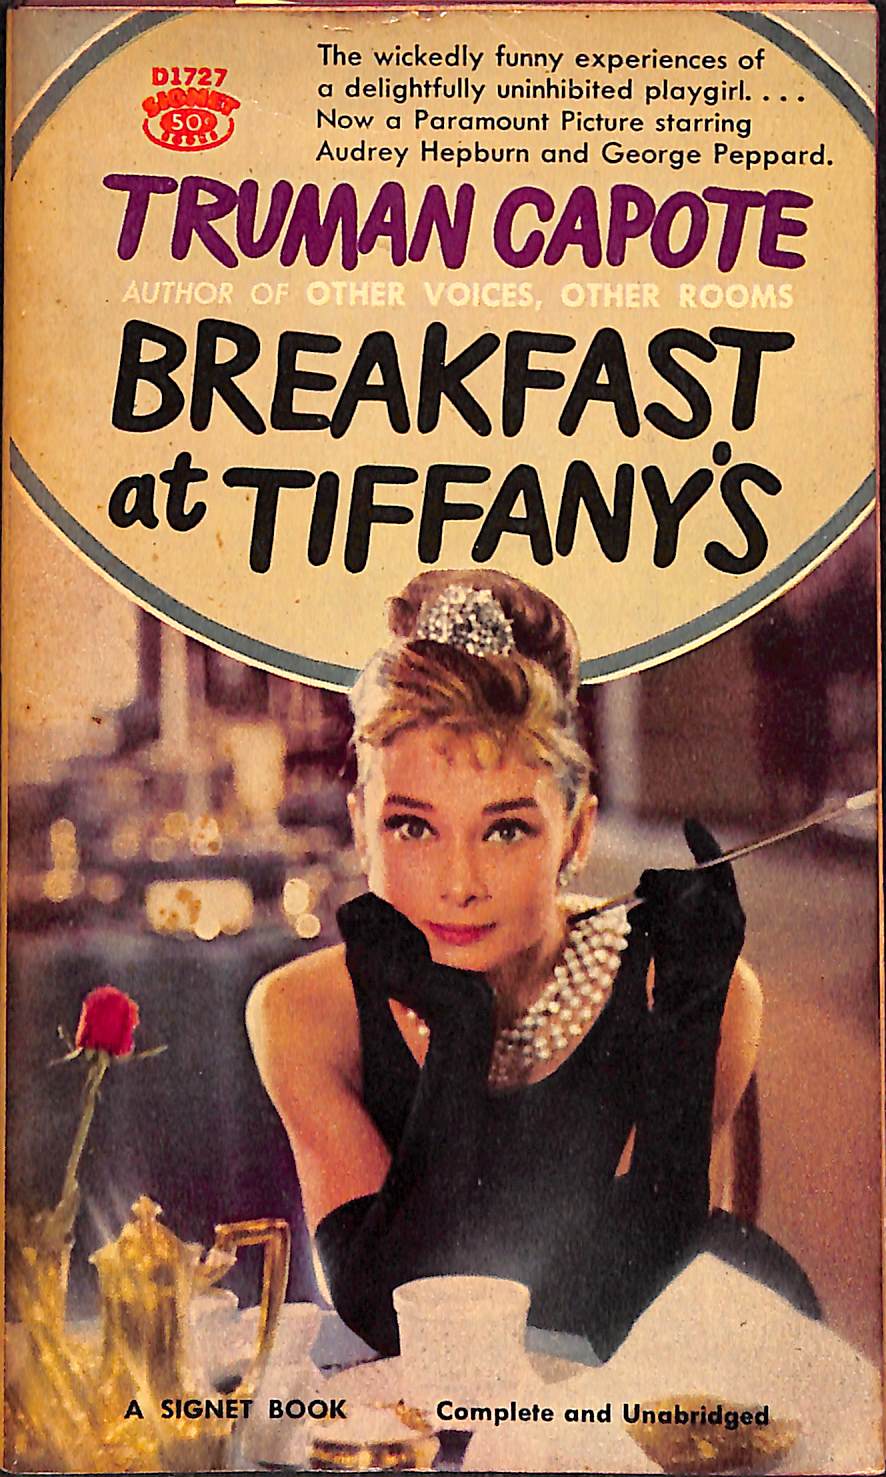 With New Café, Tiffany & Co. Realizes the Promise of Breakfast at